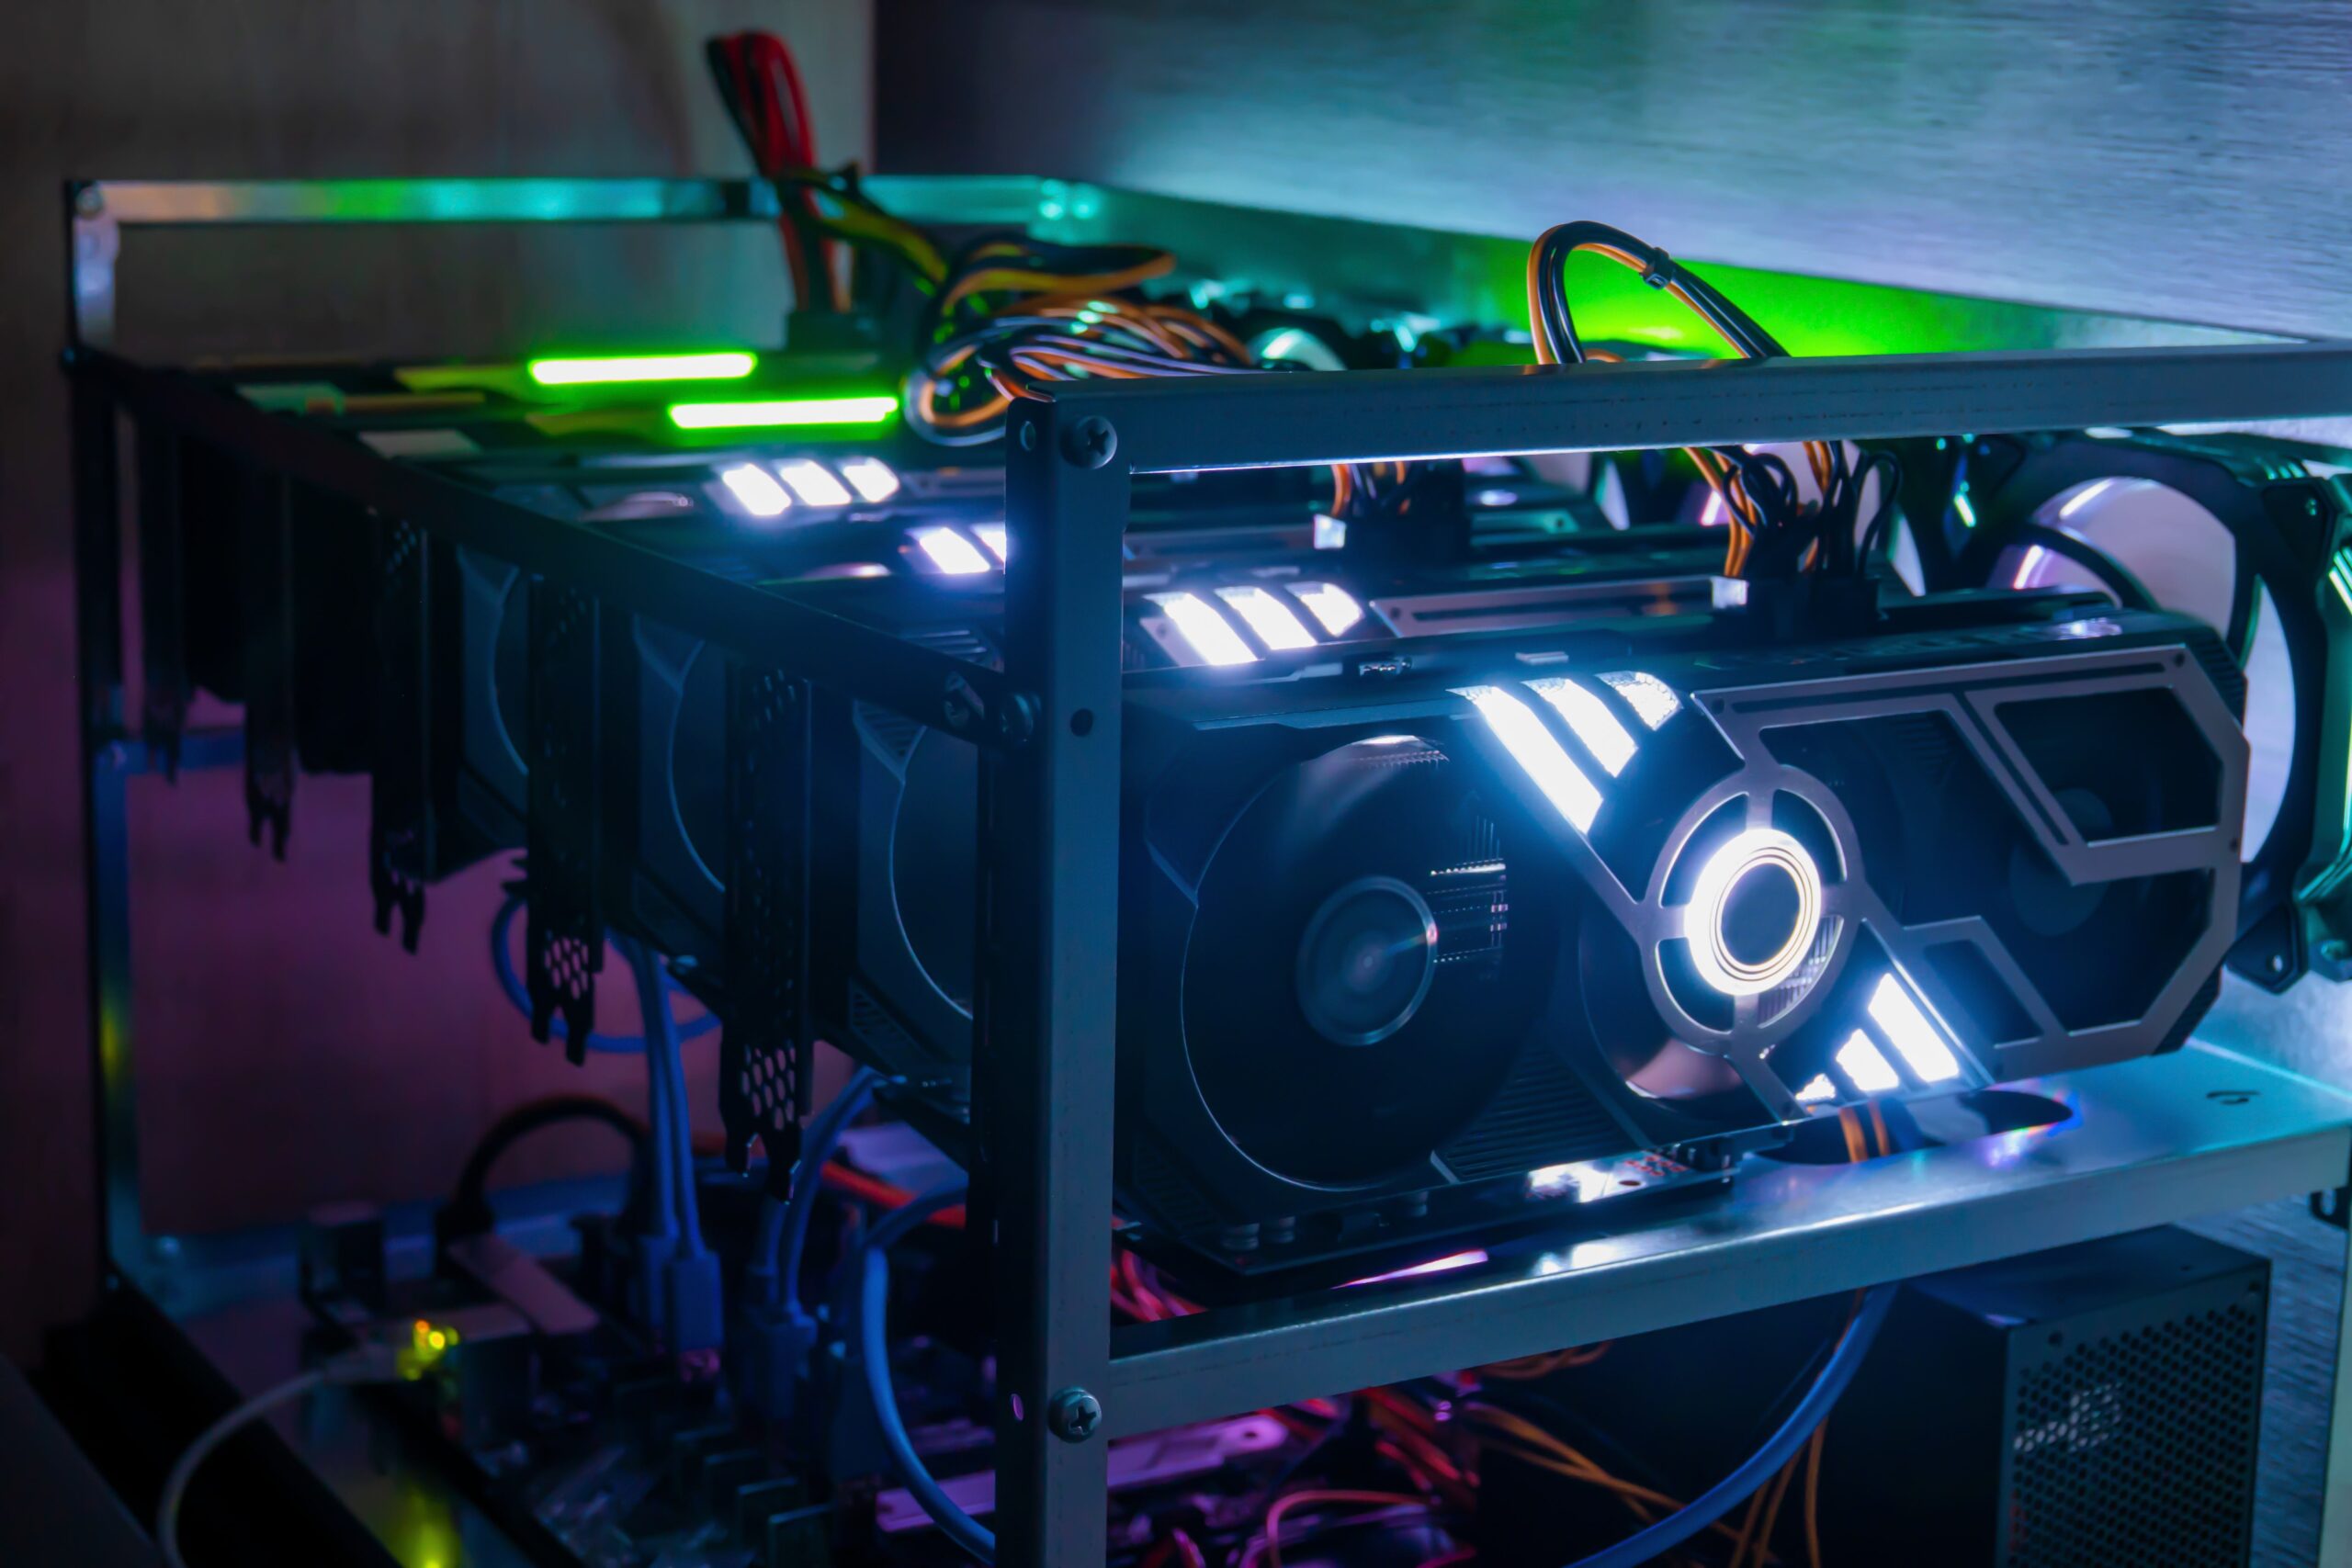 Graphic Cards lined up in a crypto mining rig